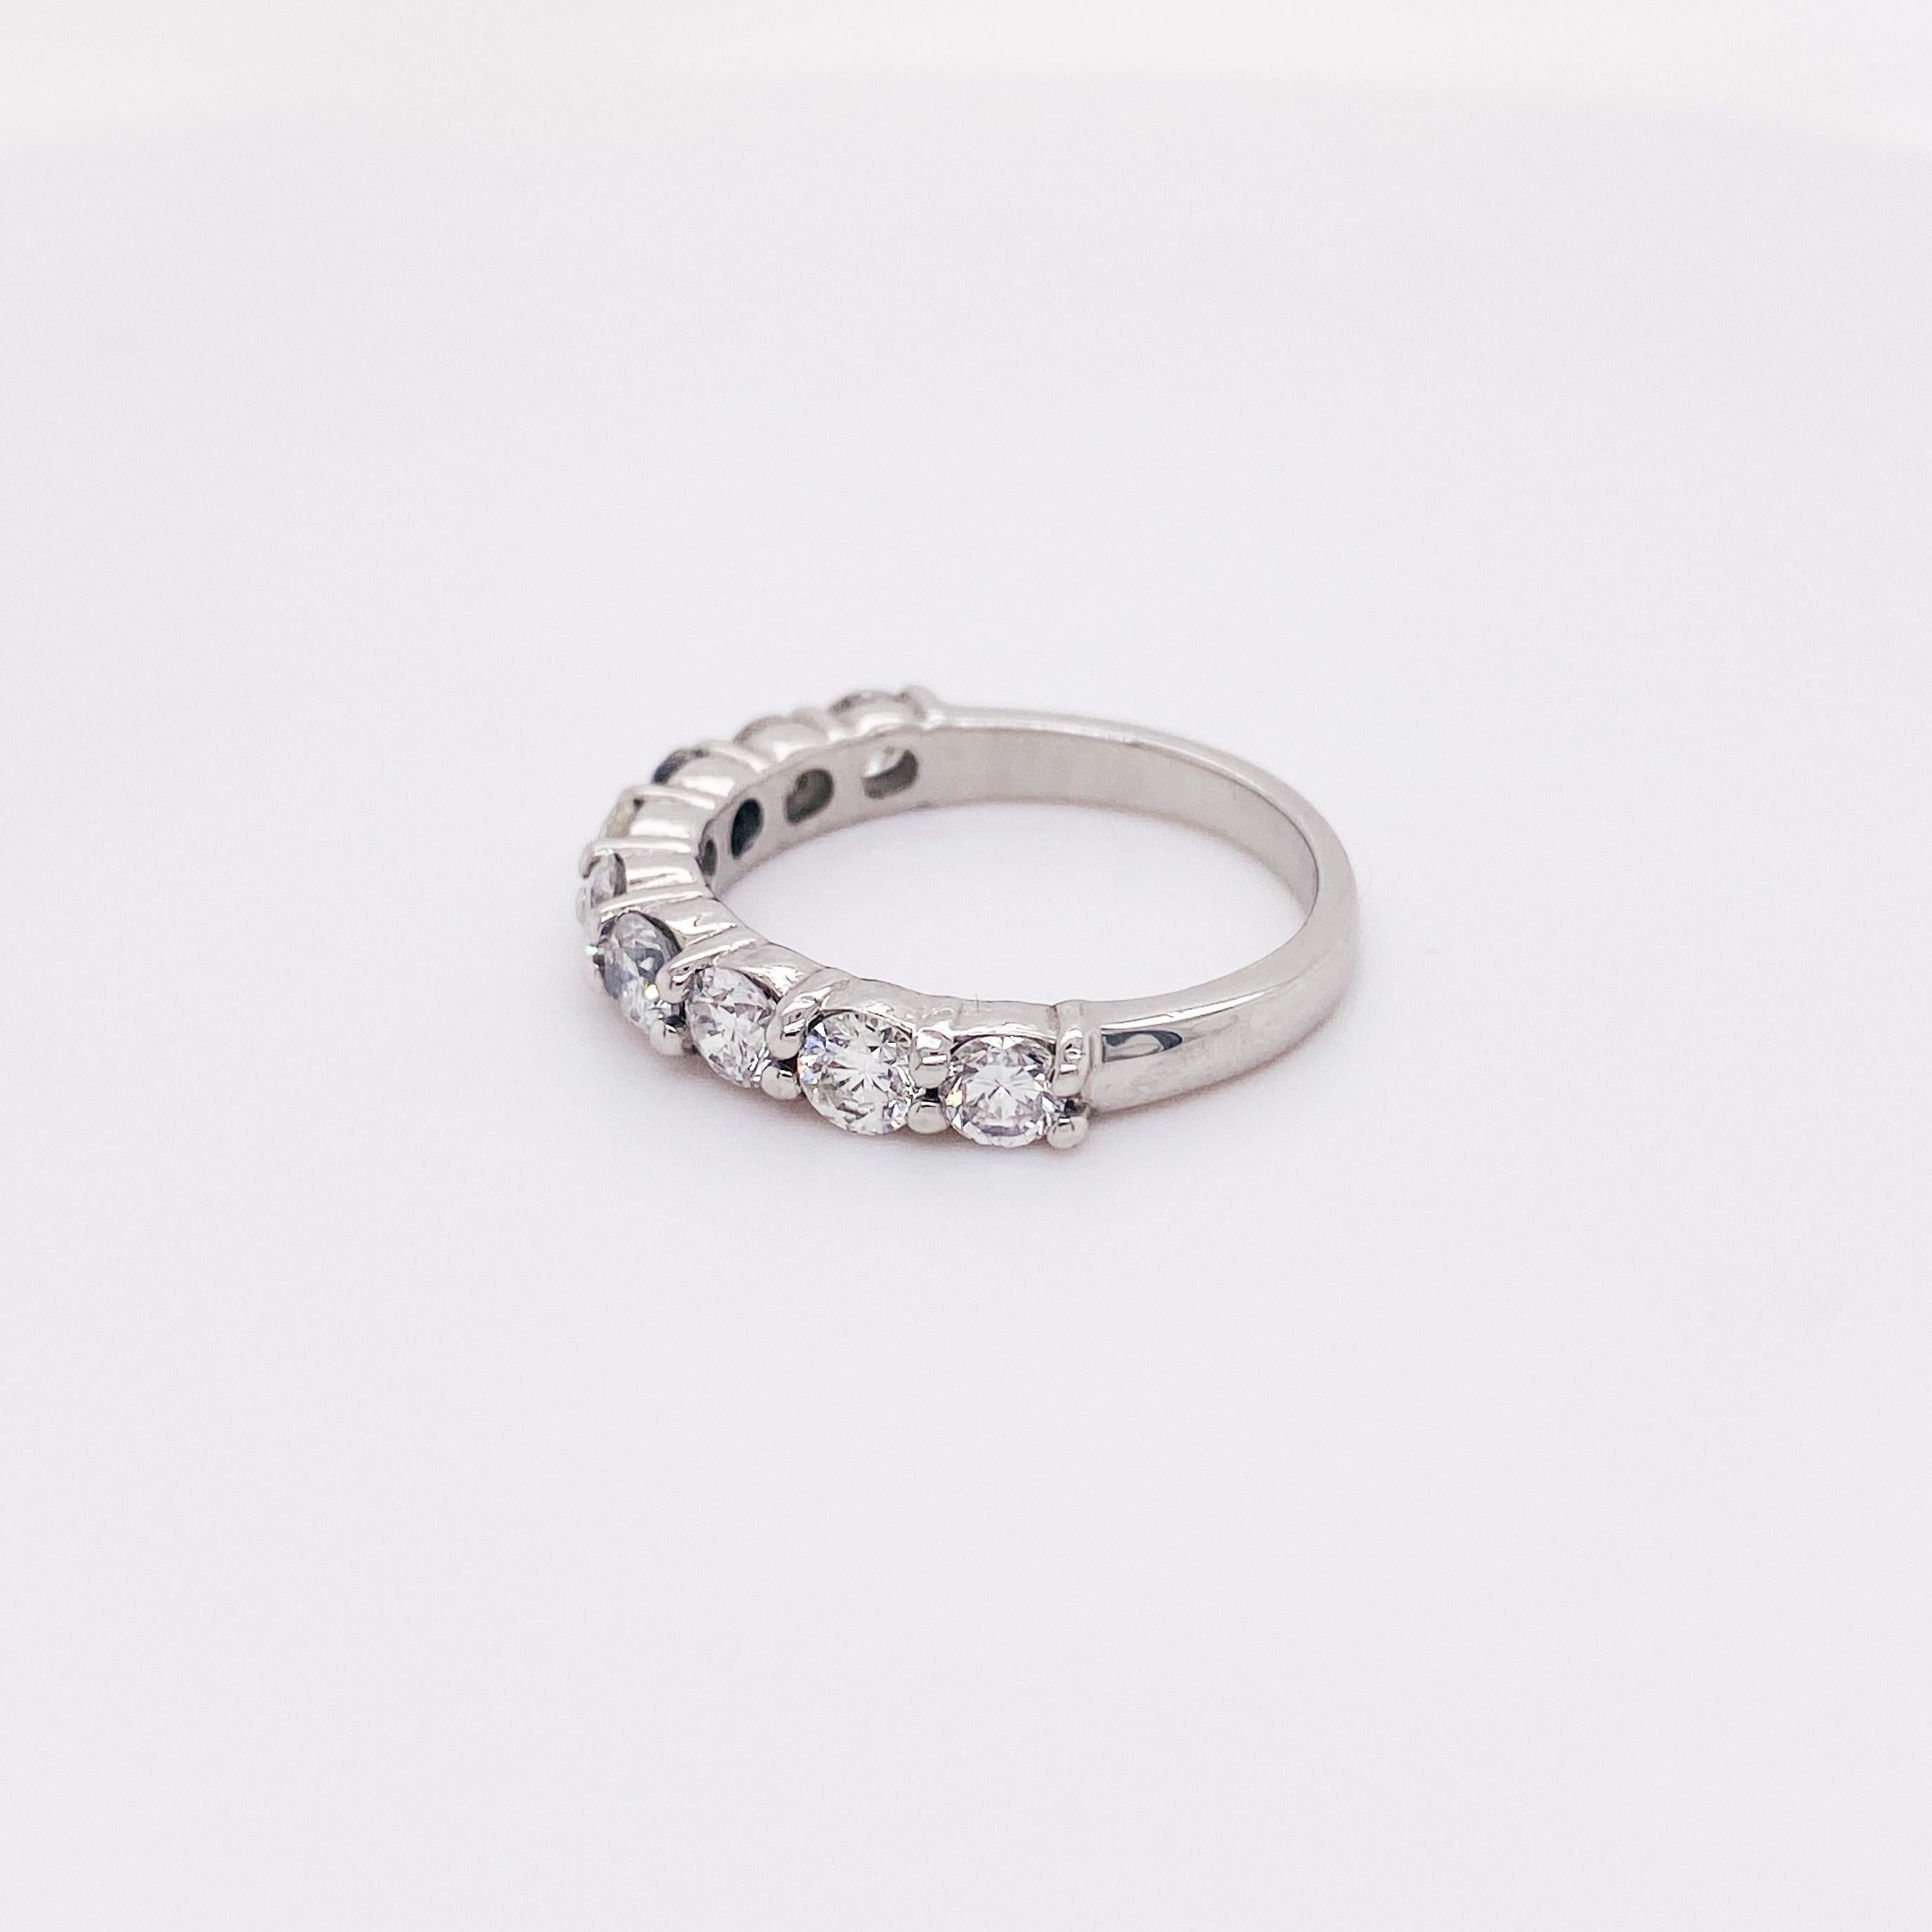 Rock your diamonds and stack up a beautiful set of rings with this gorgeous strong and sturdy platinum ring. Nine diamonds sit halfway around the ring with minimalist shared prongs. At 3.3 mm wide, this band will stack beautifully with your other